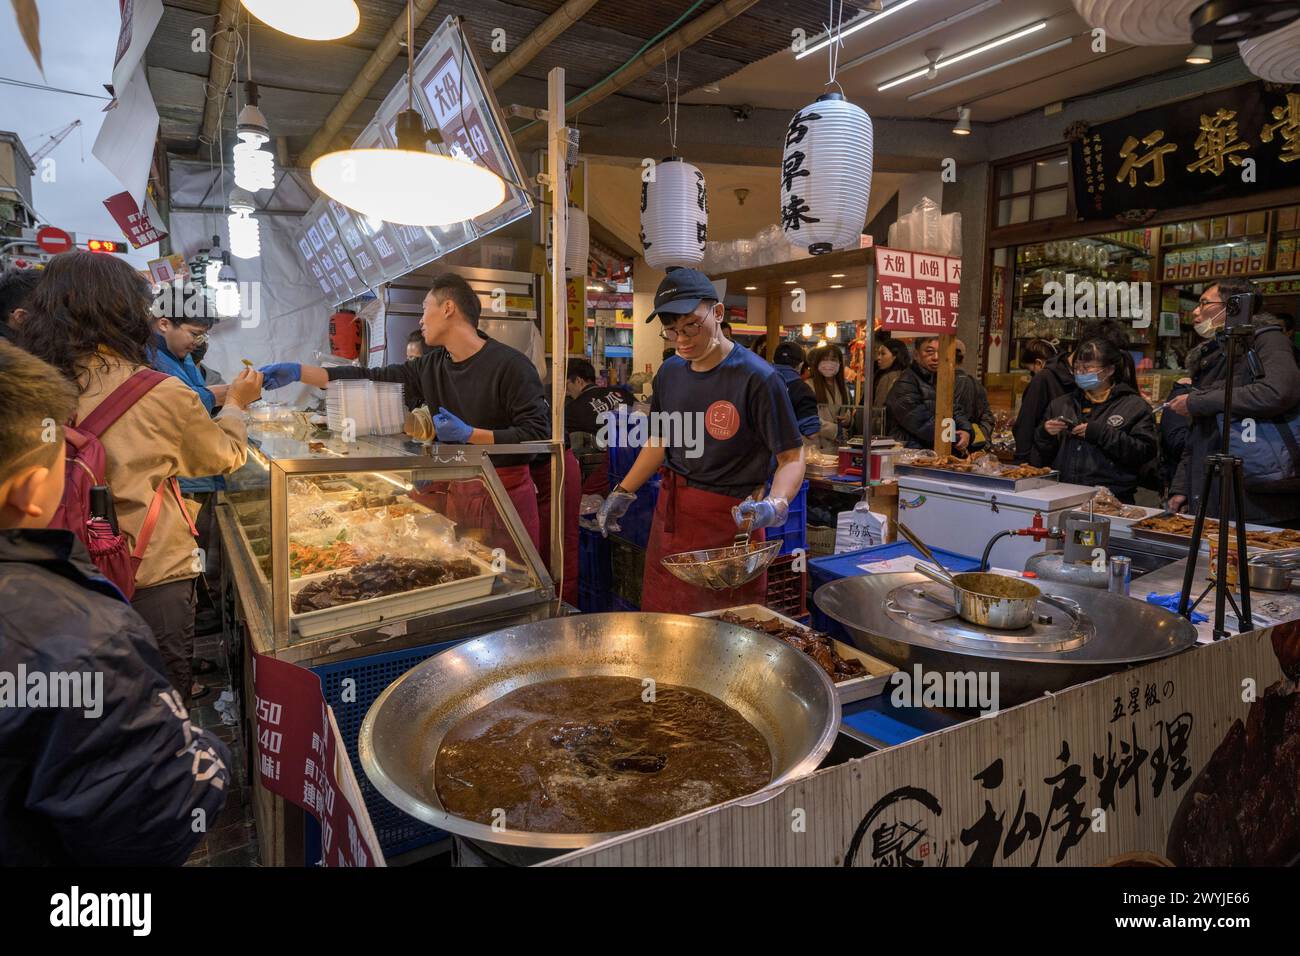 A vibrant and busy street food market with various stalls serving local Asian cuisine, capturing the essence of daily life Stock Photo